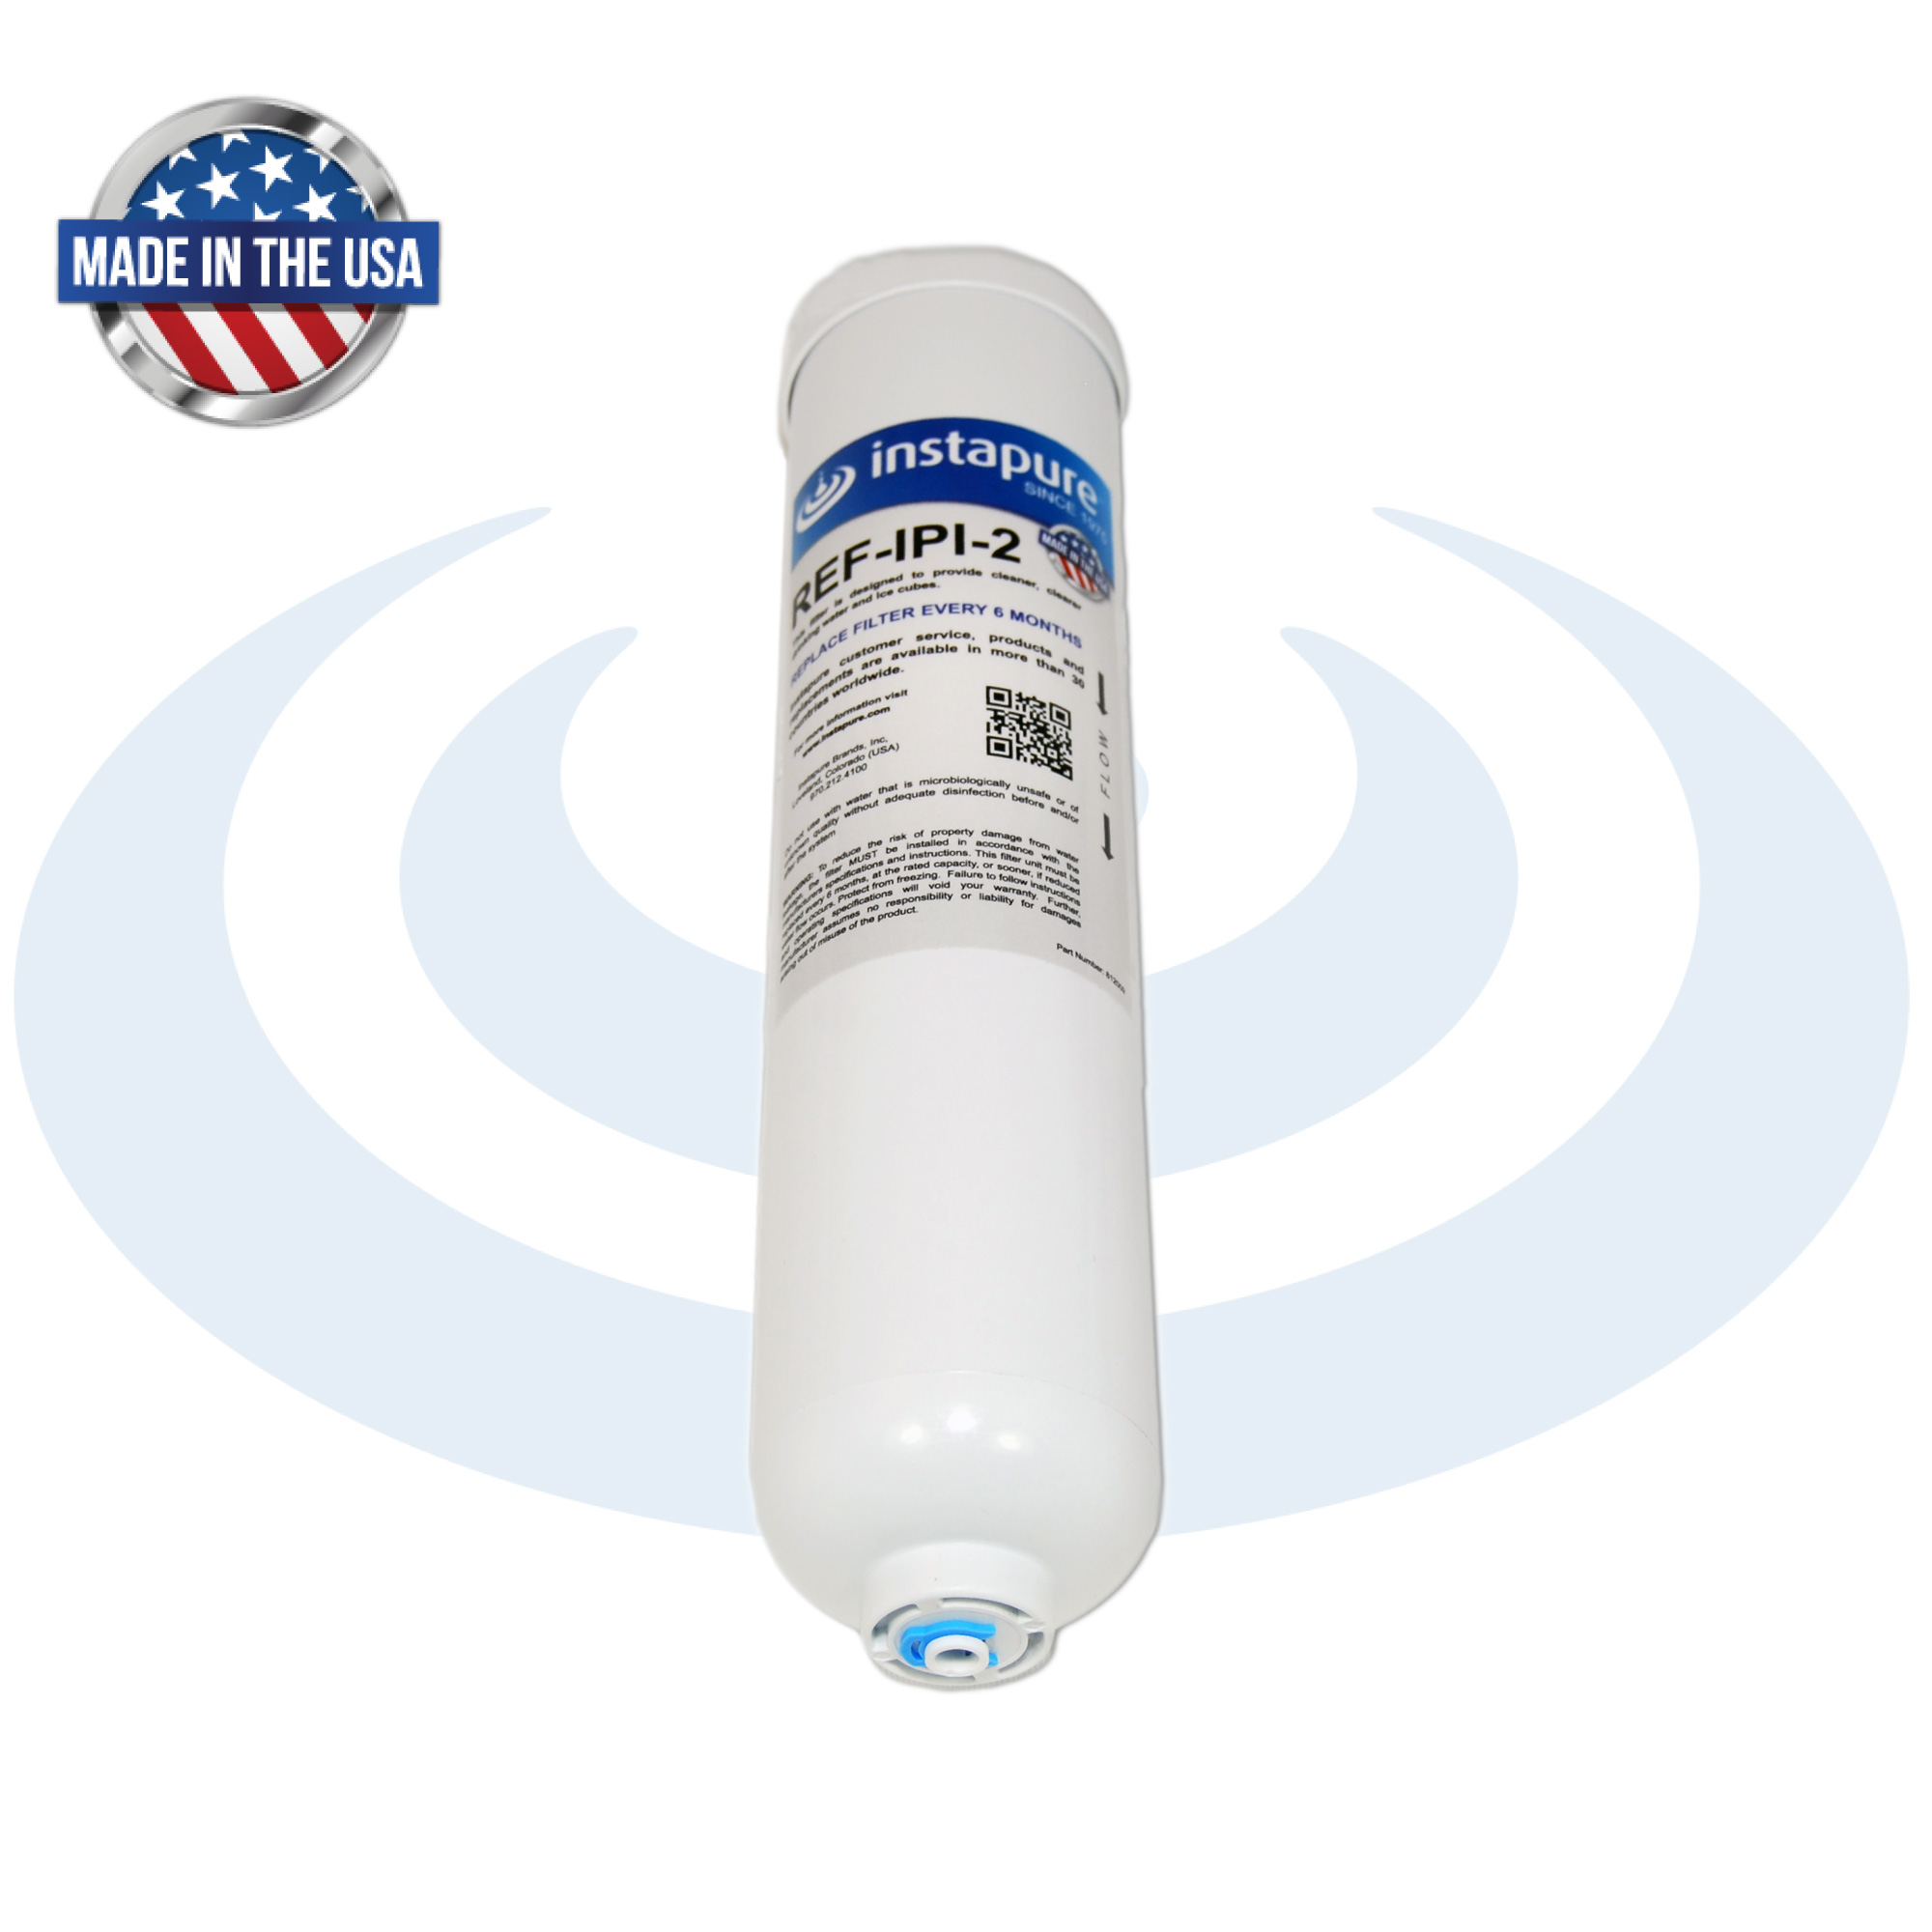 Made In Usa Da29 c Compatible Refrigerator Filter By Instapure Ref Ipi 2 Ultra Filter Fits Maytag Samsung Da29 e More As Low As 25 95 Instapure